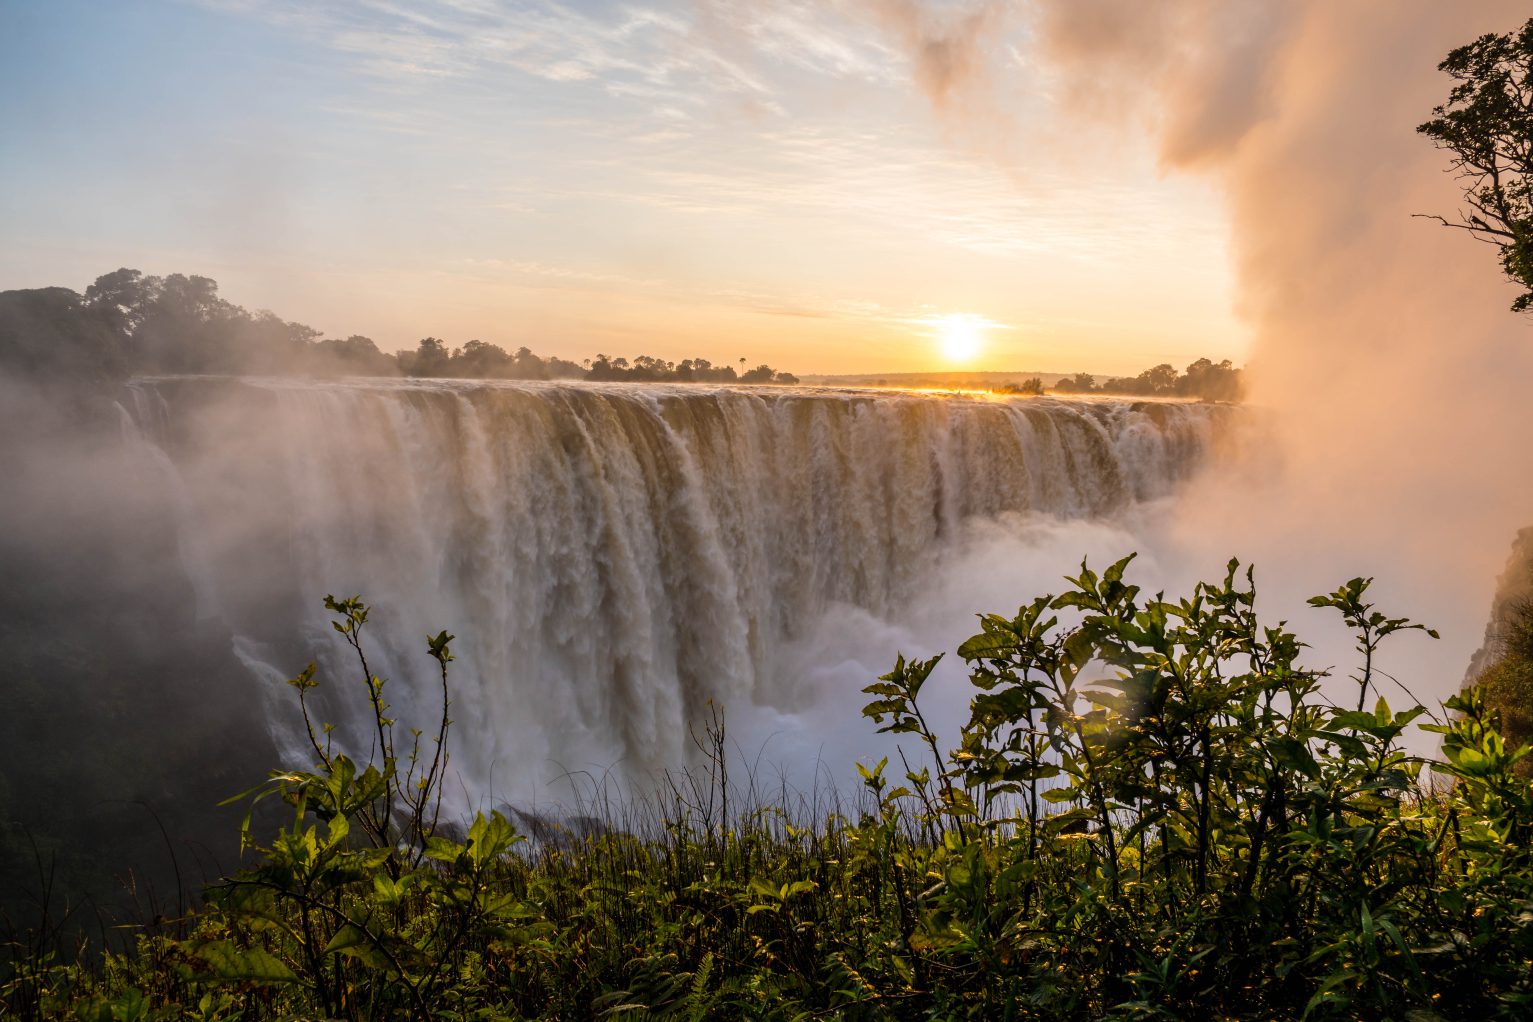 One of the world's wonders Victoria Falls